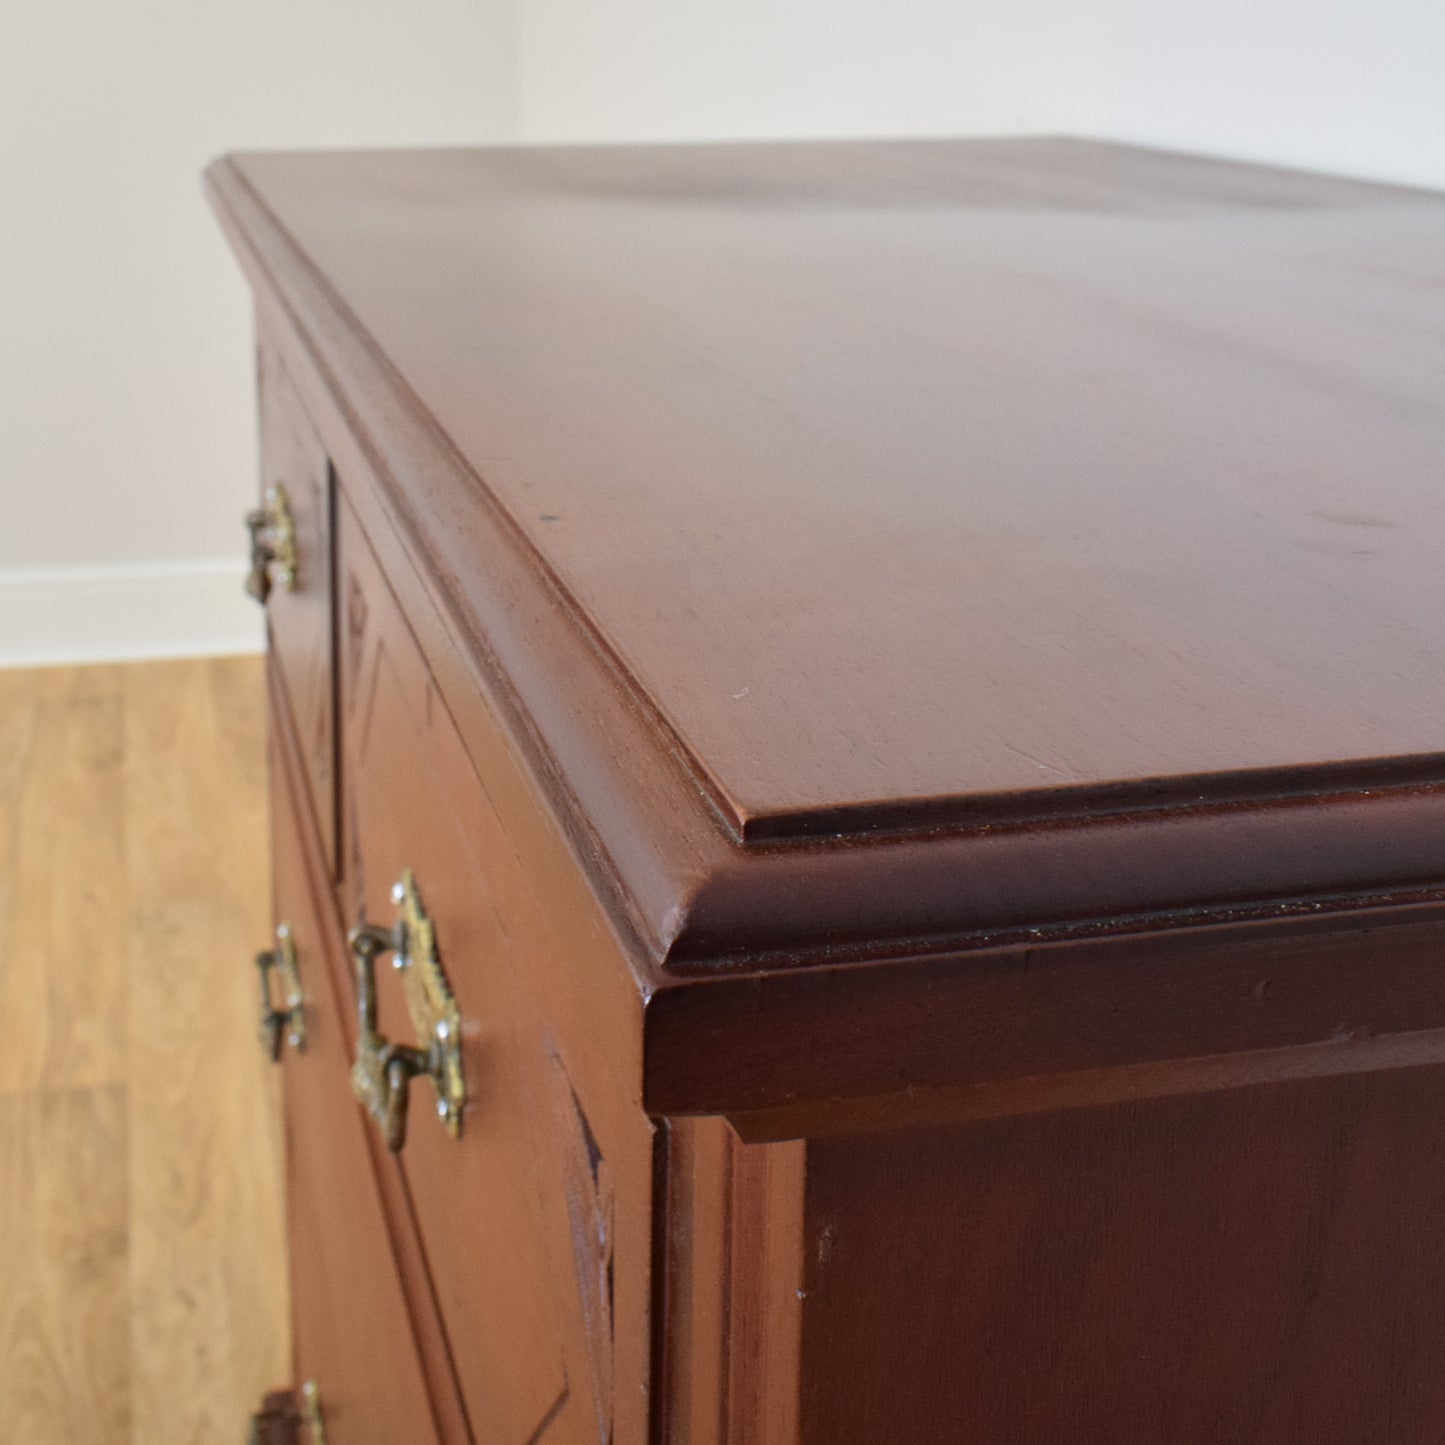 Restored Chest of Drawers